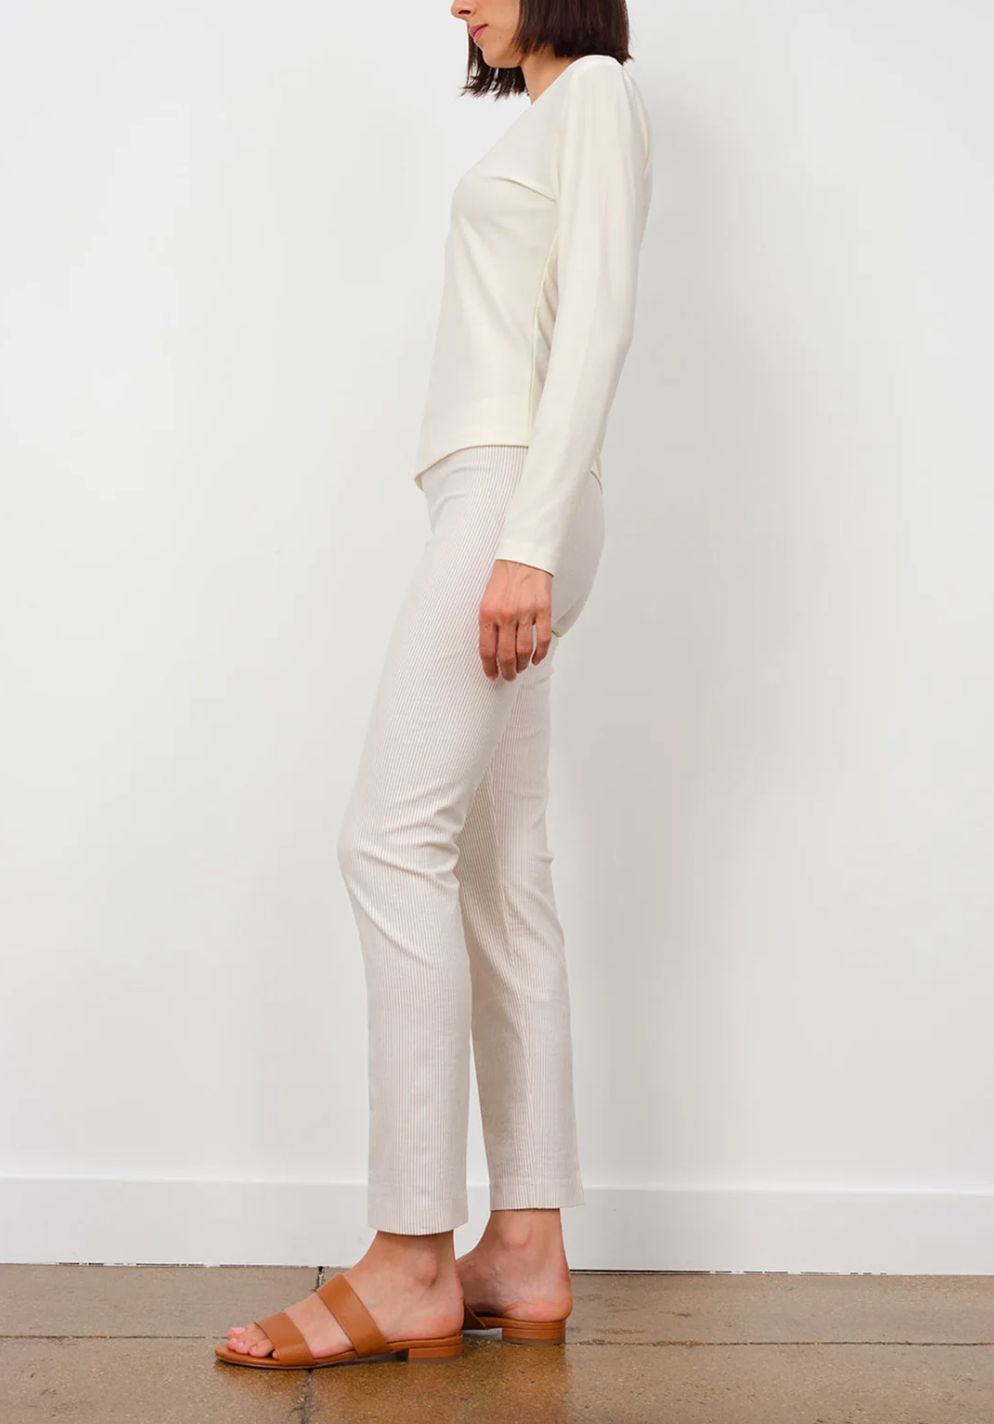 A woman stands against a plain background wearing Avenue Montaigne&#39;s Lulu Pant in cream, paired with a matching long-sleeve top and brown open-toe sandals. The image, captured in Scottsdale Arizona, shows her from the side.